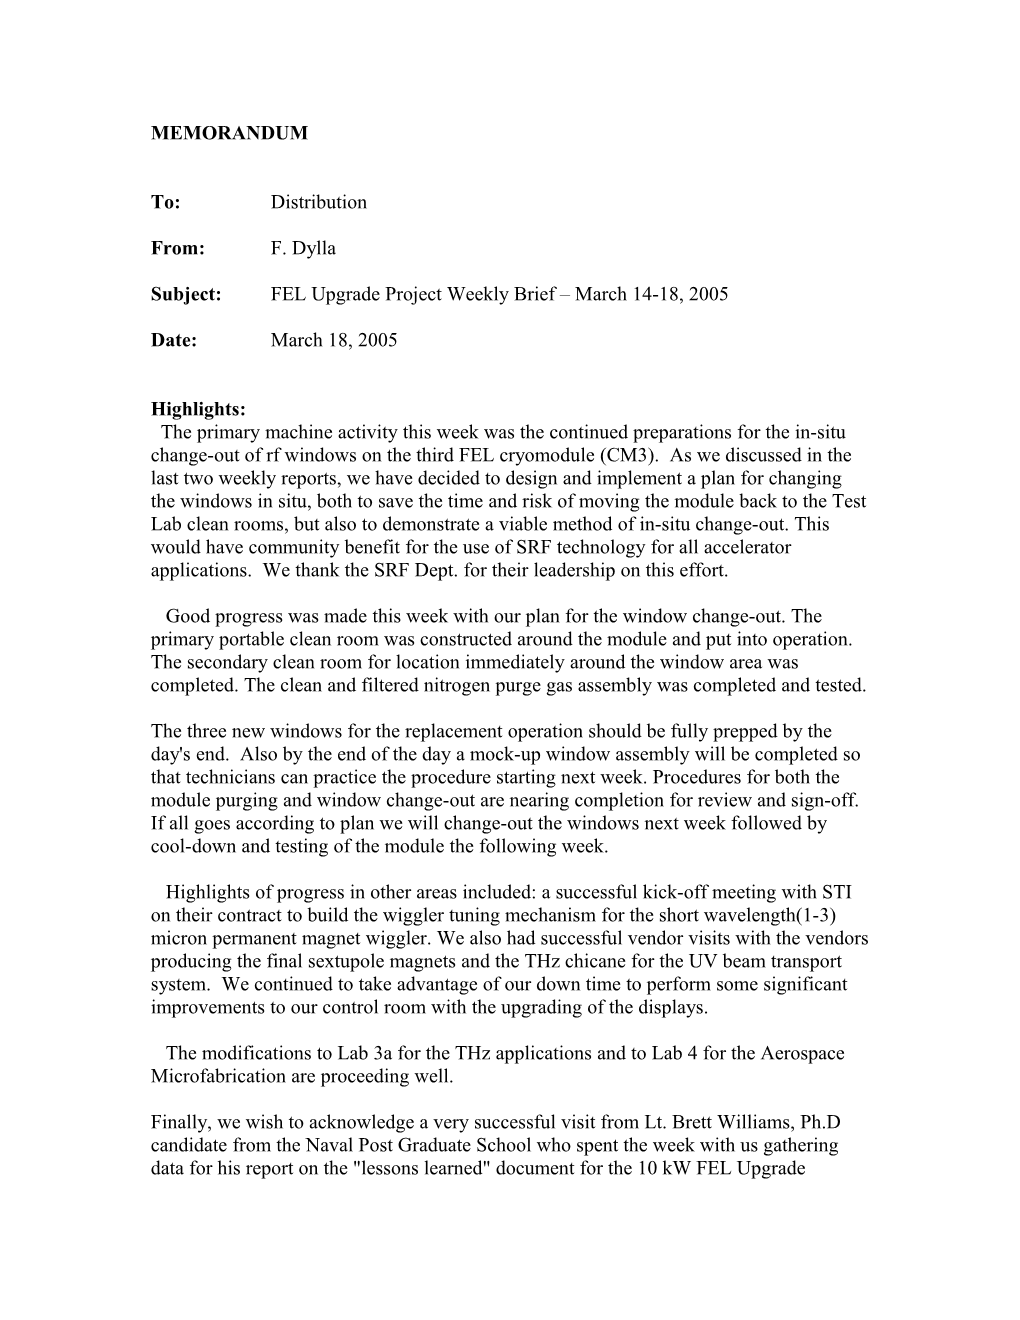 Subject:FEL Upgrade Project Weekly Brief March 14-18, 2005